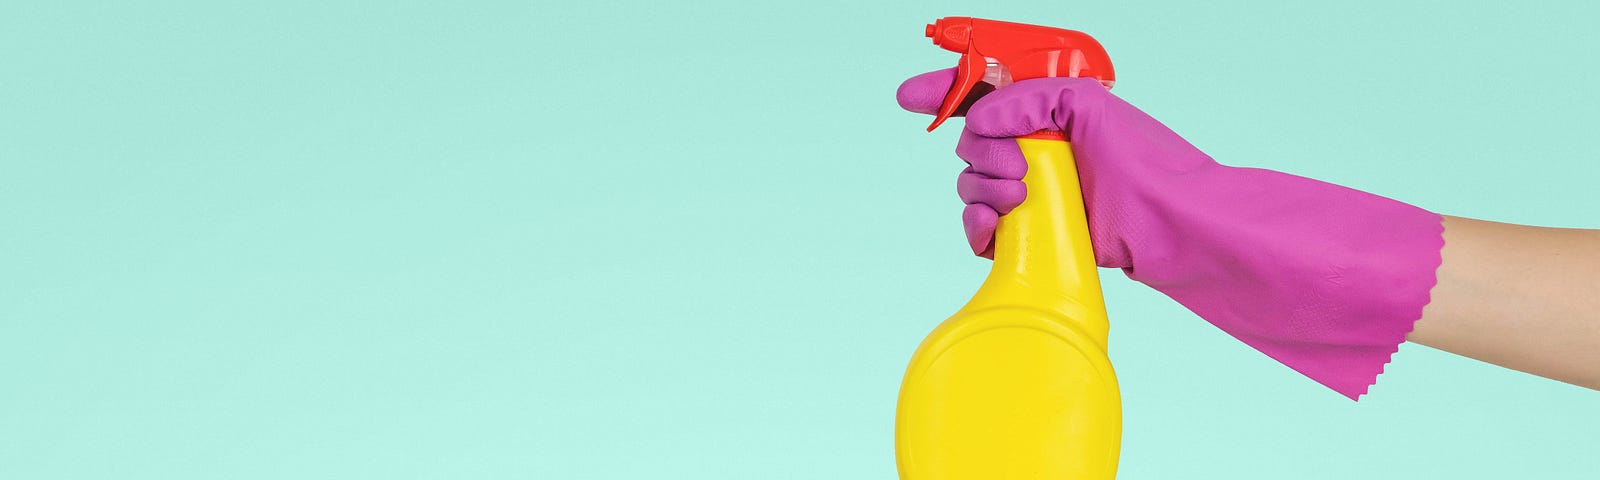 Arm emerges from the right side of the image, with the lower upper extremity covered by a pink glove. The hand holds a yellow spray bottle with a red cap.